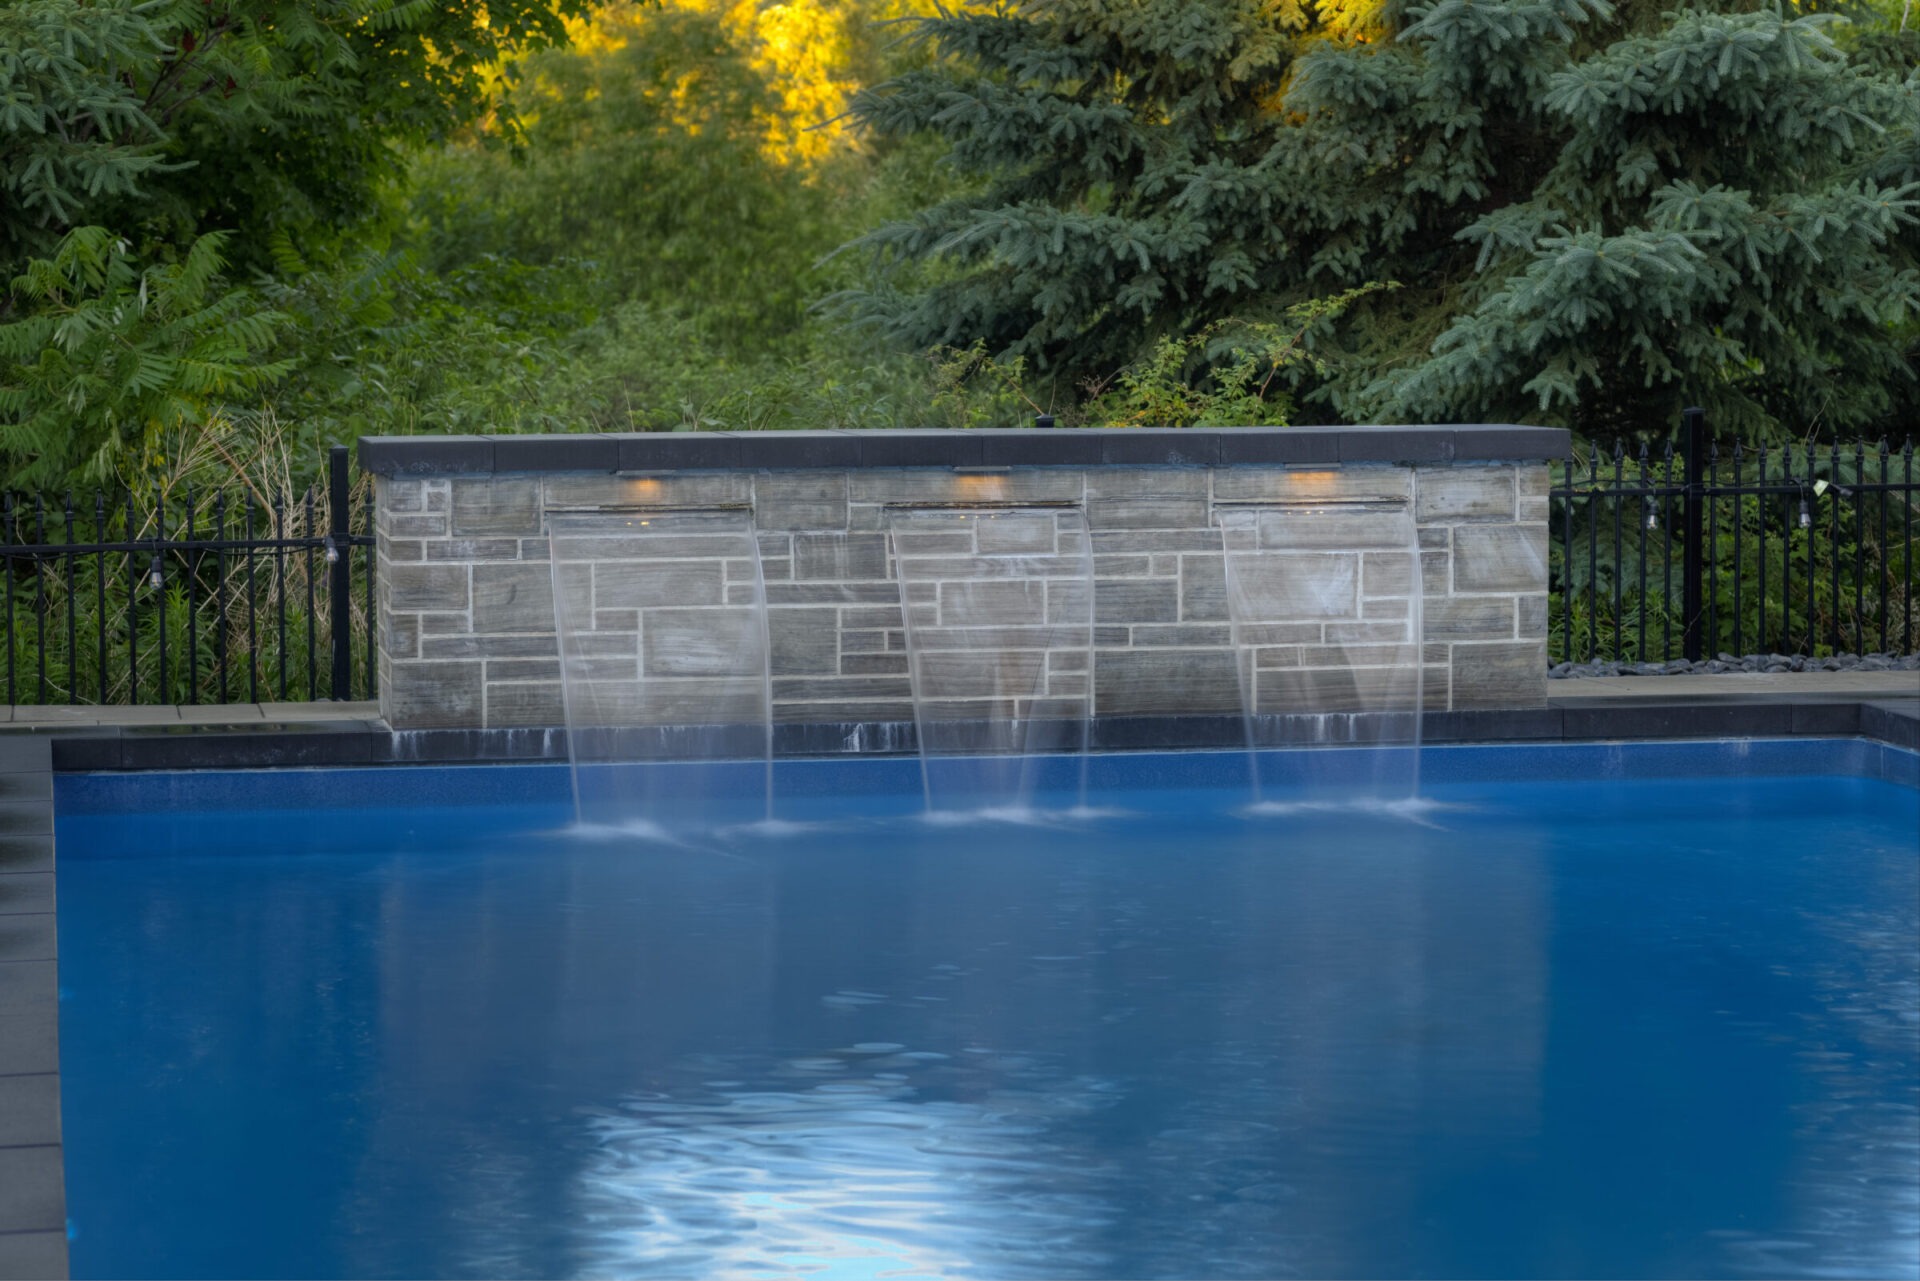 A serene swimming pool with water features cascading from a stone wall, surrounded by lush greenery and fencing, in a tranquil garden setting.